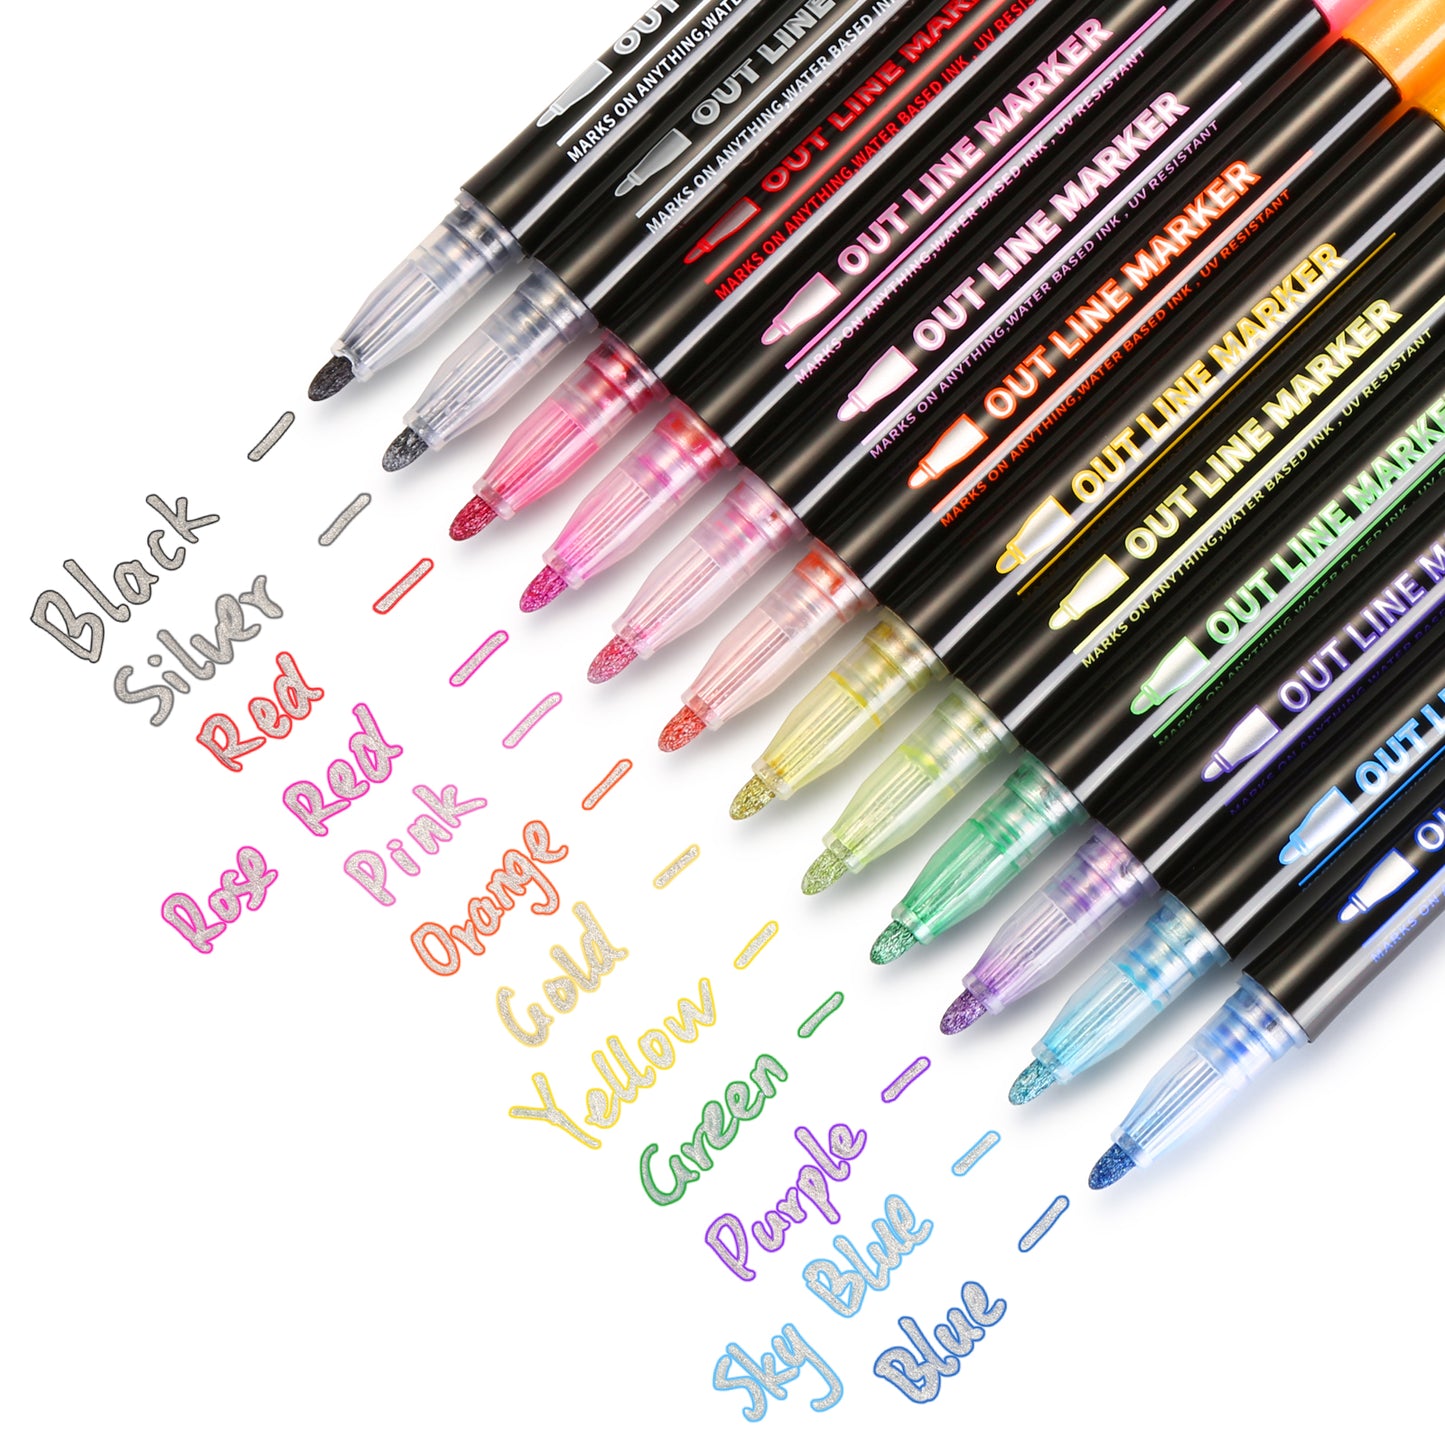 Outline Metallic Marker Pens,12 Colors Double Line Outline Pens, Self-Outline Metallic Markers, Perfect for Birthday Greeting, Drawing, Scrapbooks, Posters, Rock Paintings, DIY Art Crafts